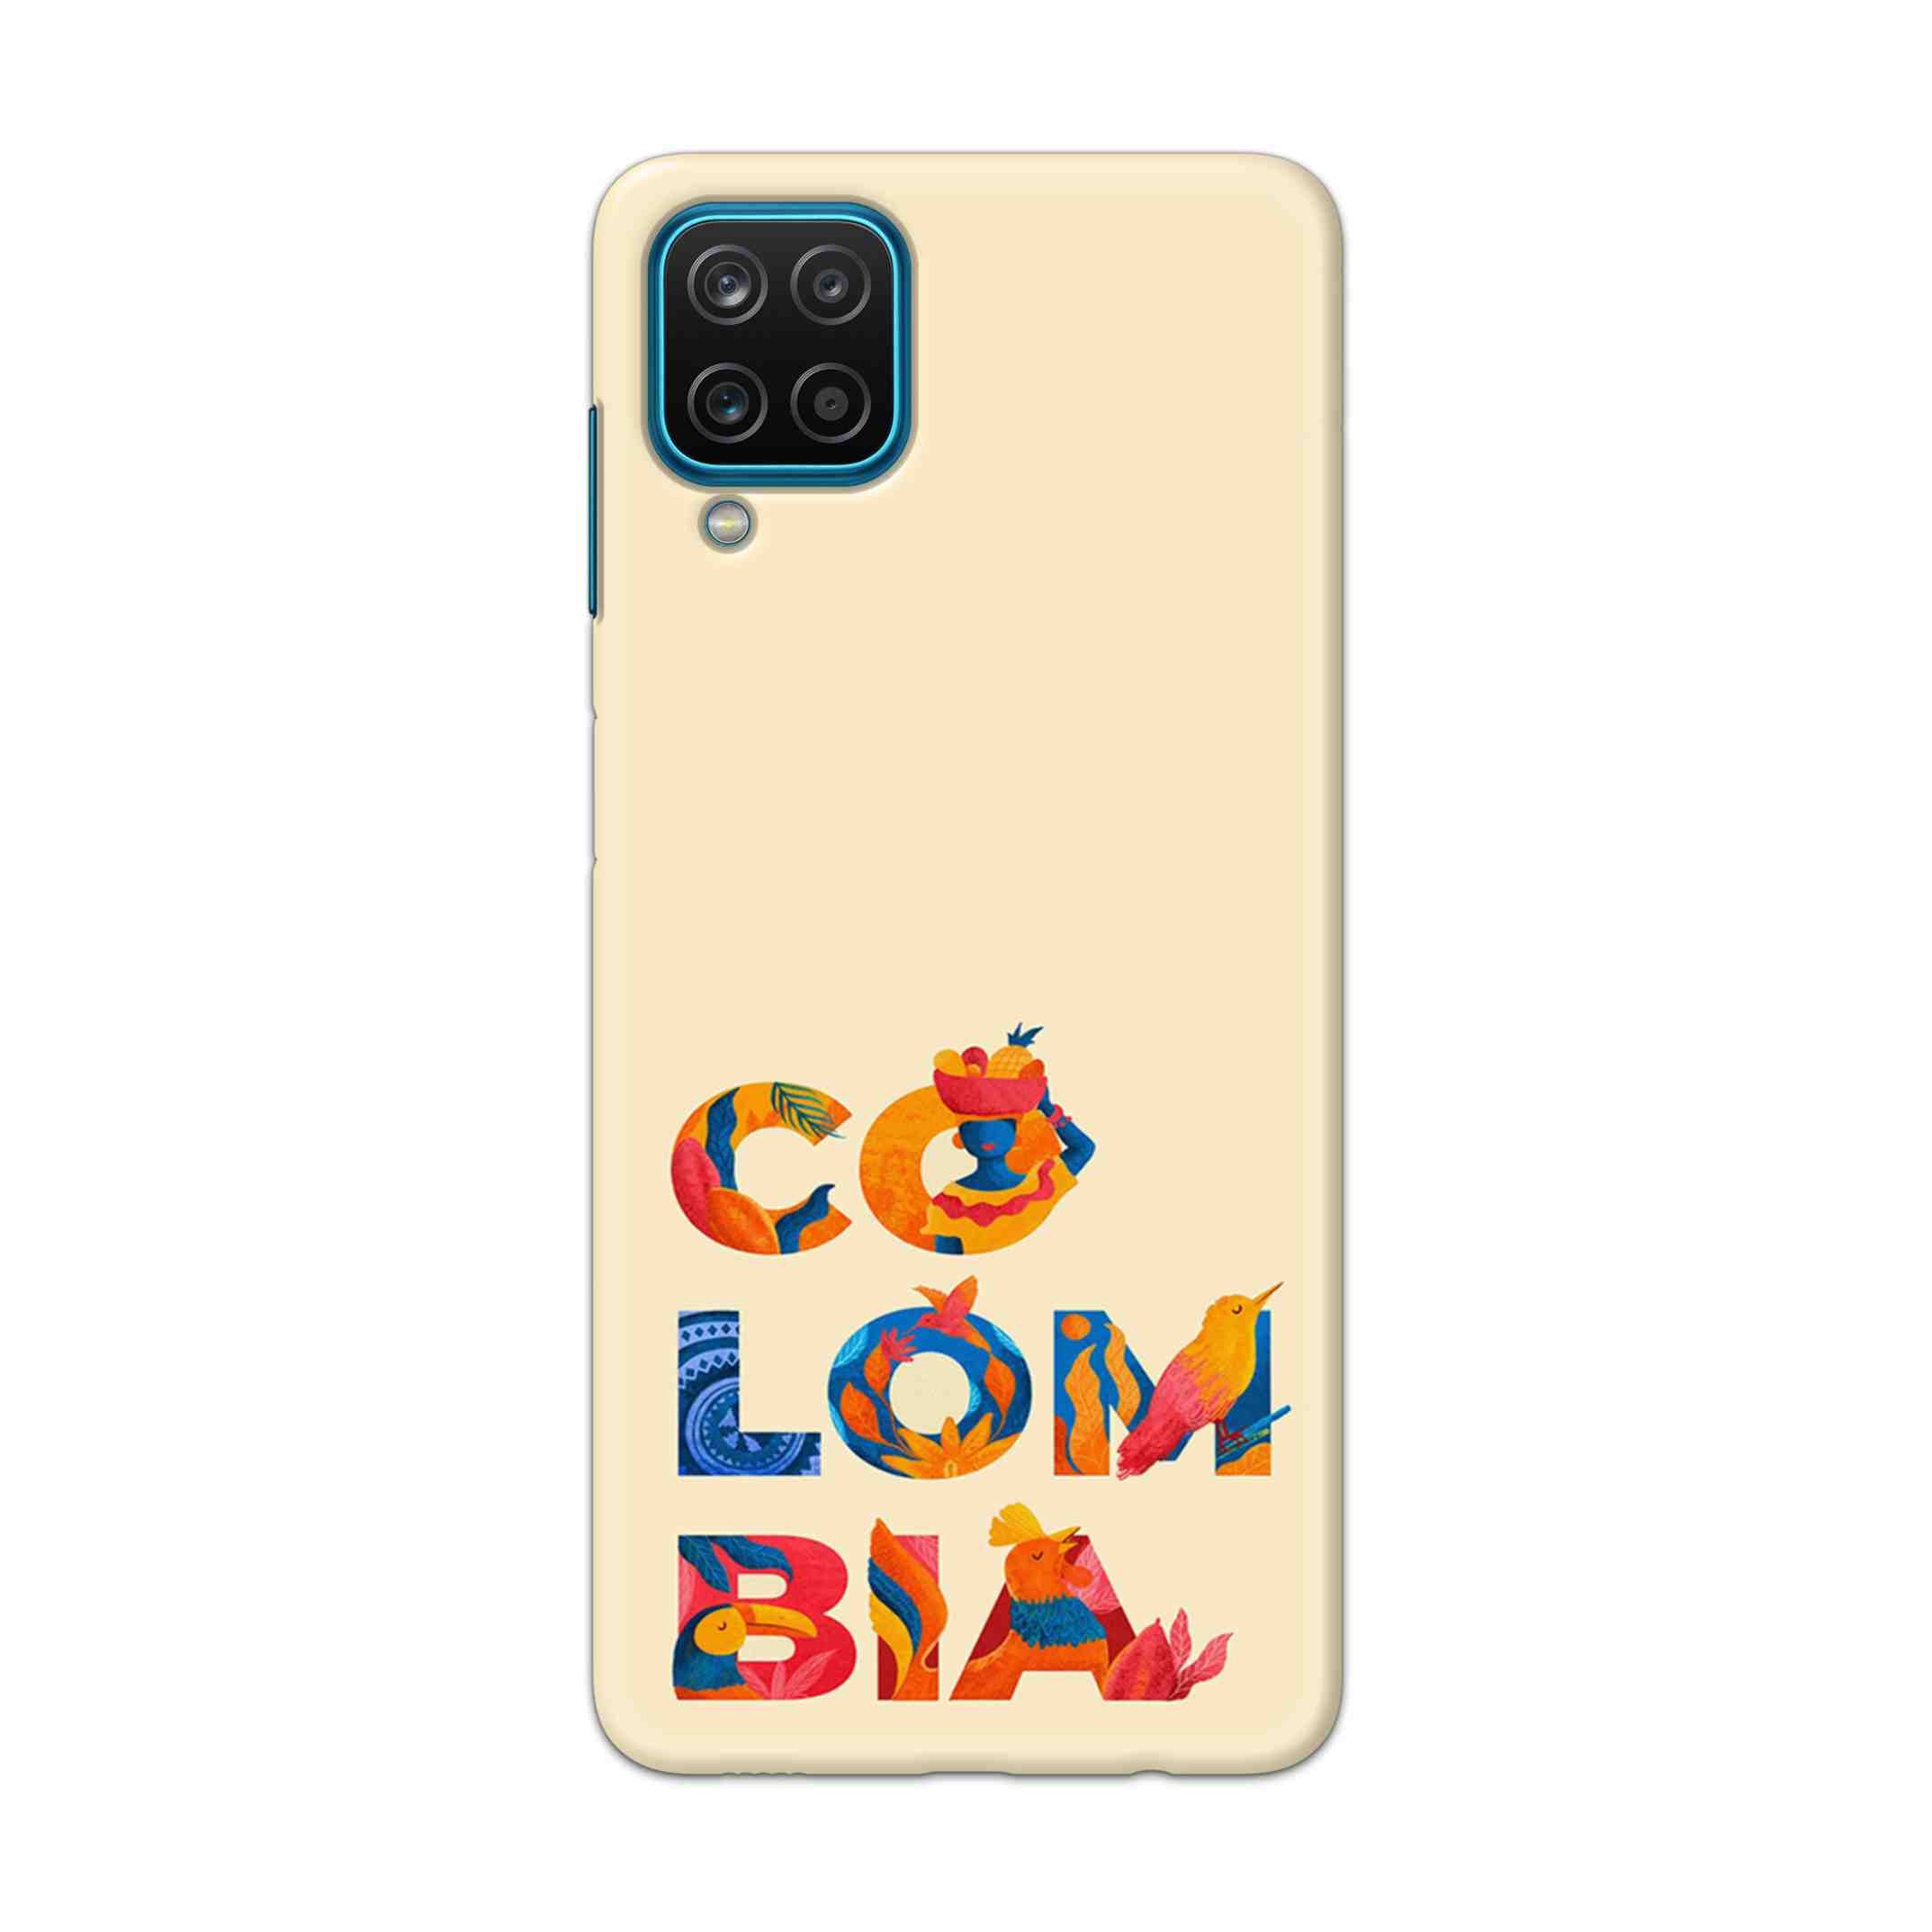 Buy Colombia Hard Back Mobile Phone Case Cover For Samsung Galaxy A12 Online